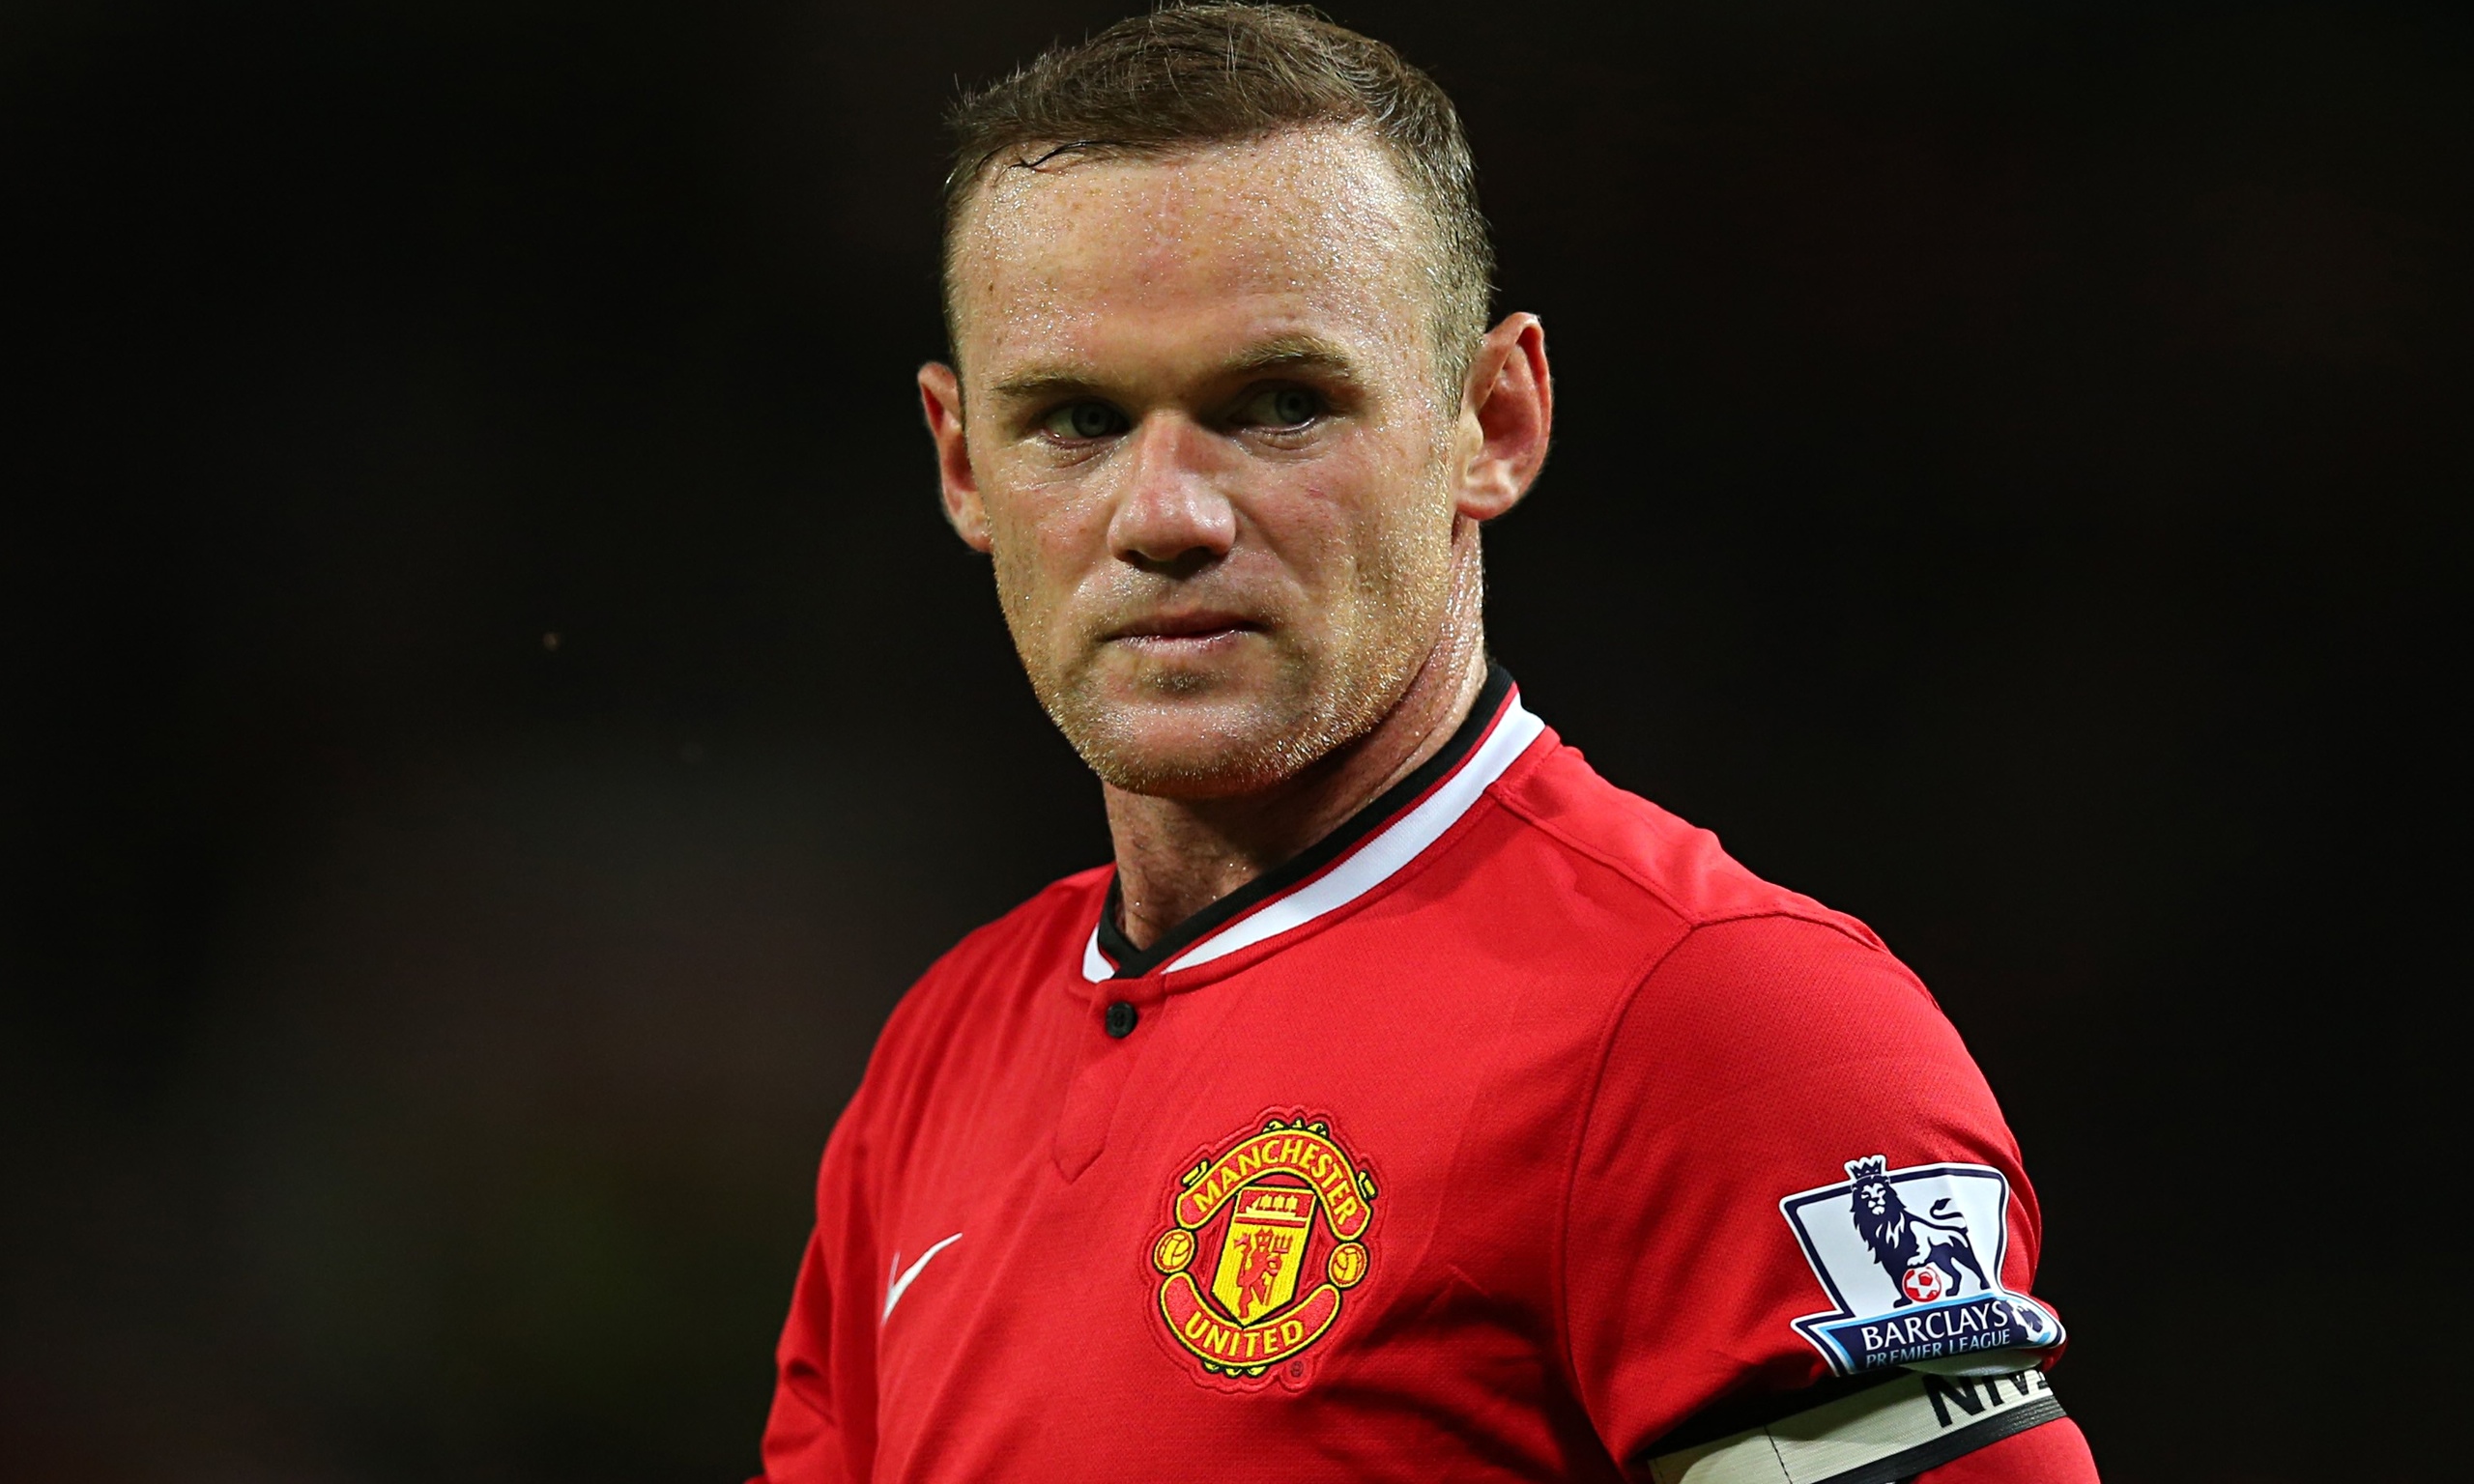 http://static.guim.co.uk/sys-images/Guardian/Pix/pictures/2014/8/13/1407931915328/Wayne-Rooney-014.jpg